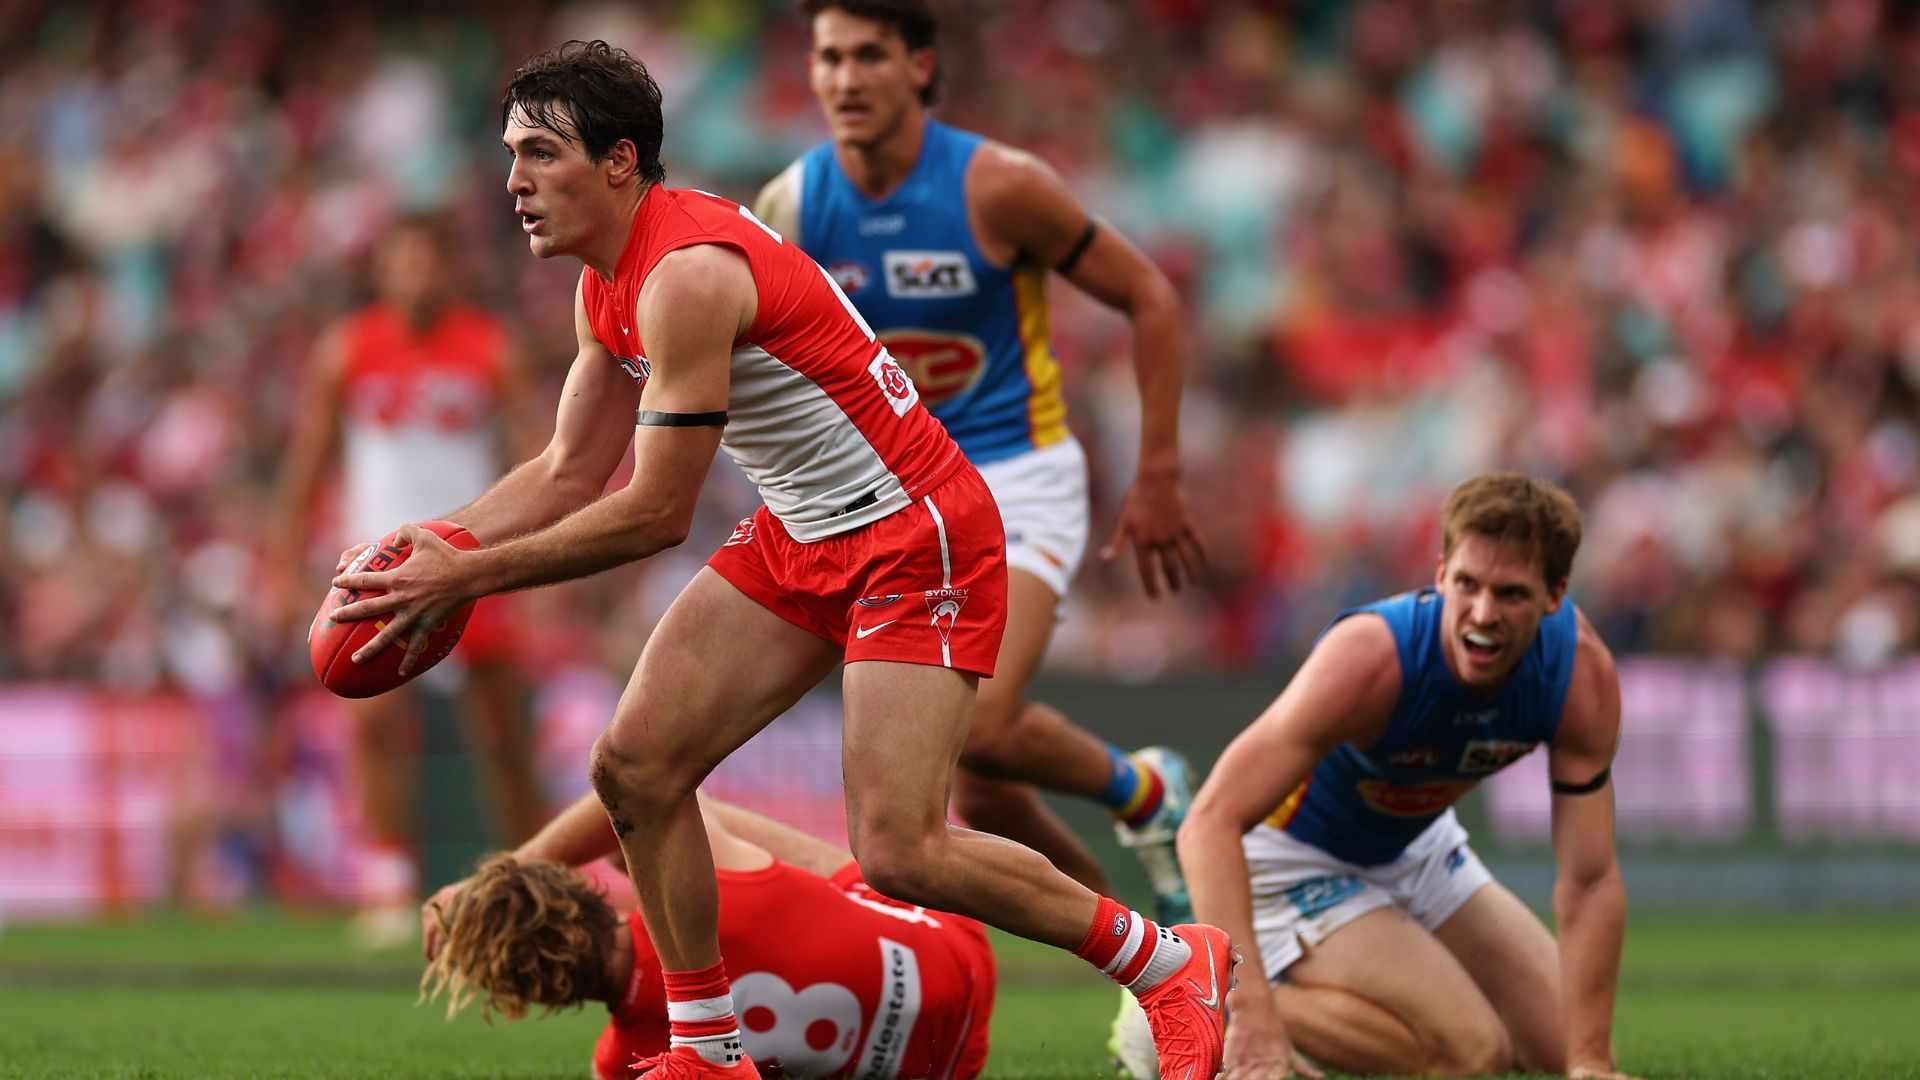 How to watch today’s Hawthorn vs. Sydney Swans AFL match: Livestream, TV channel, and start time | Goal.com Australia